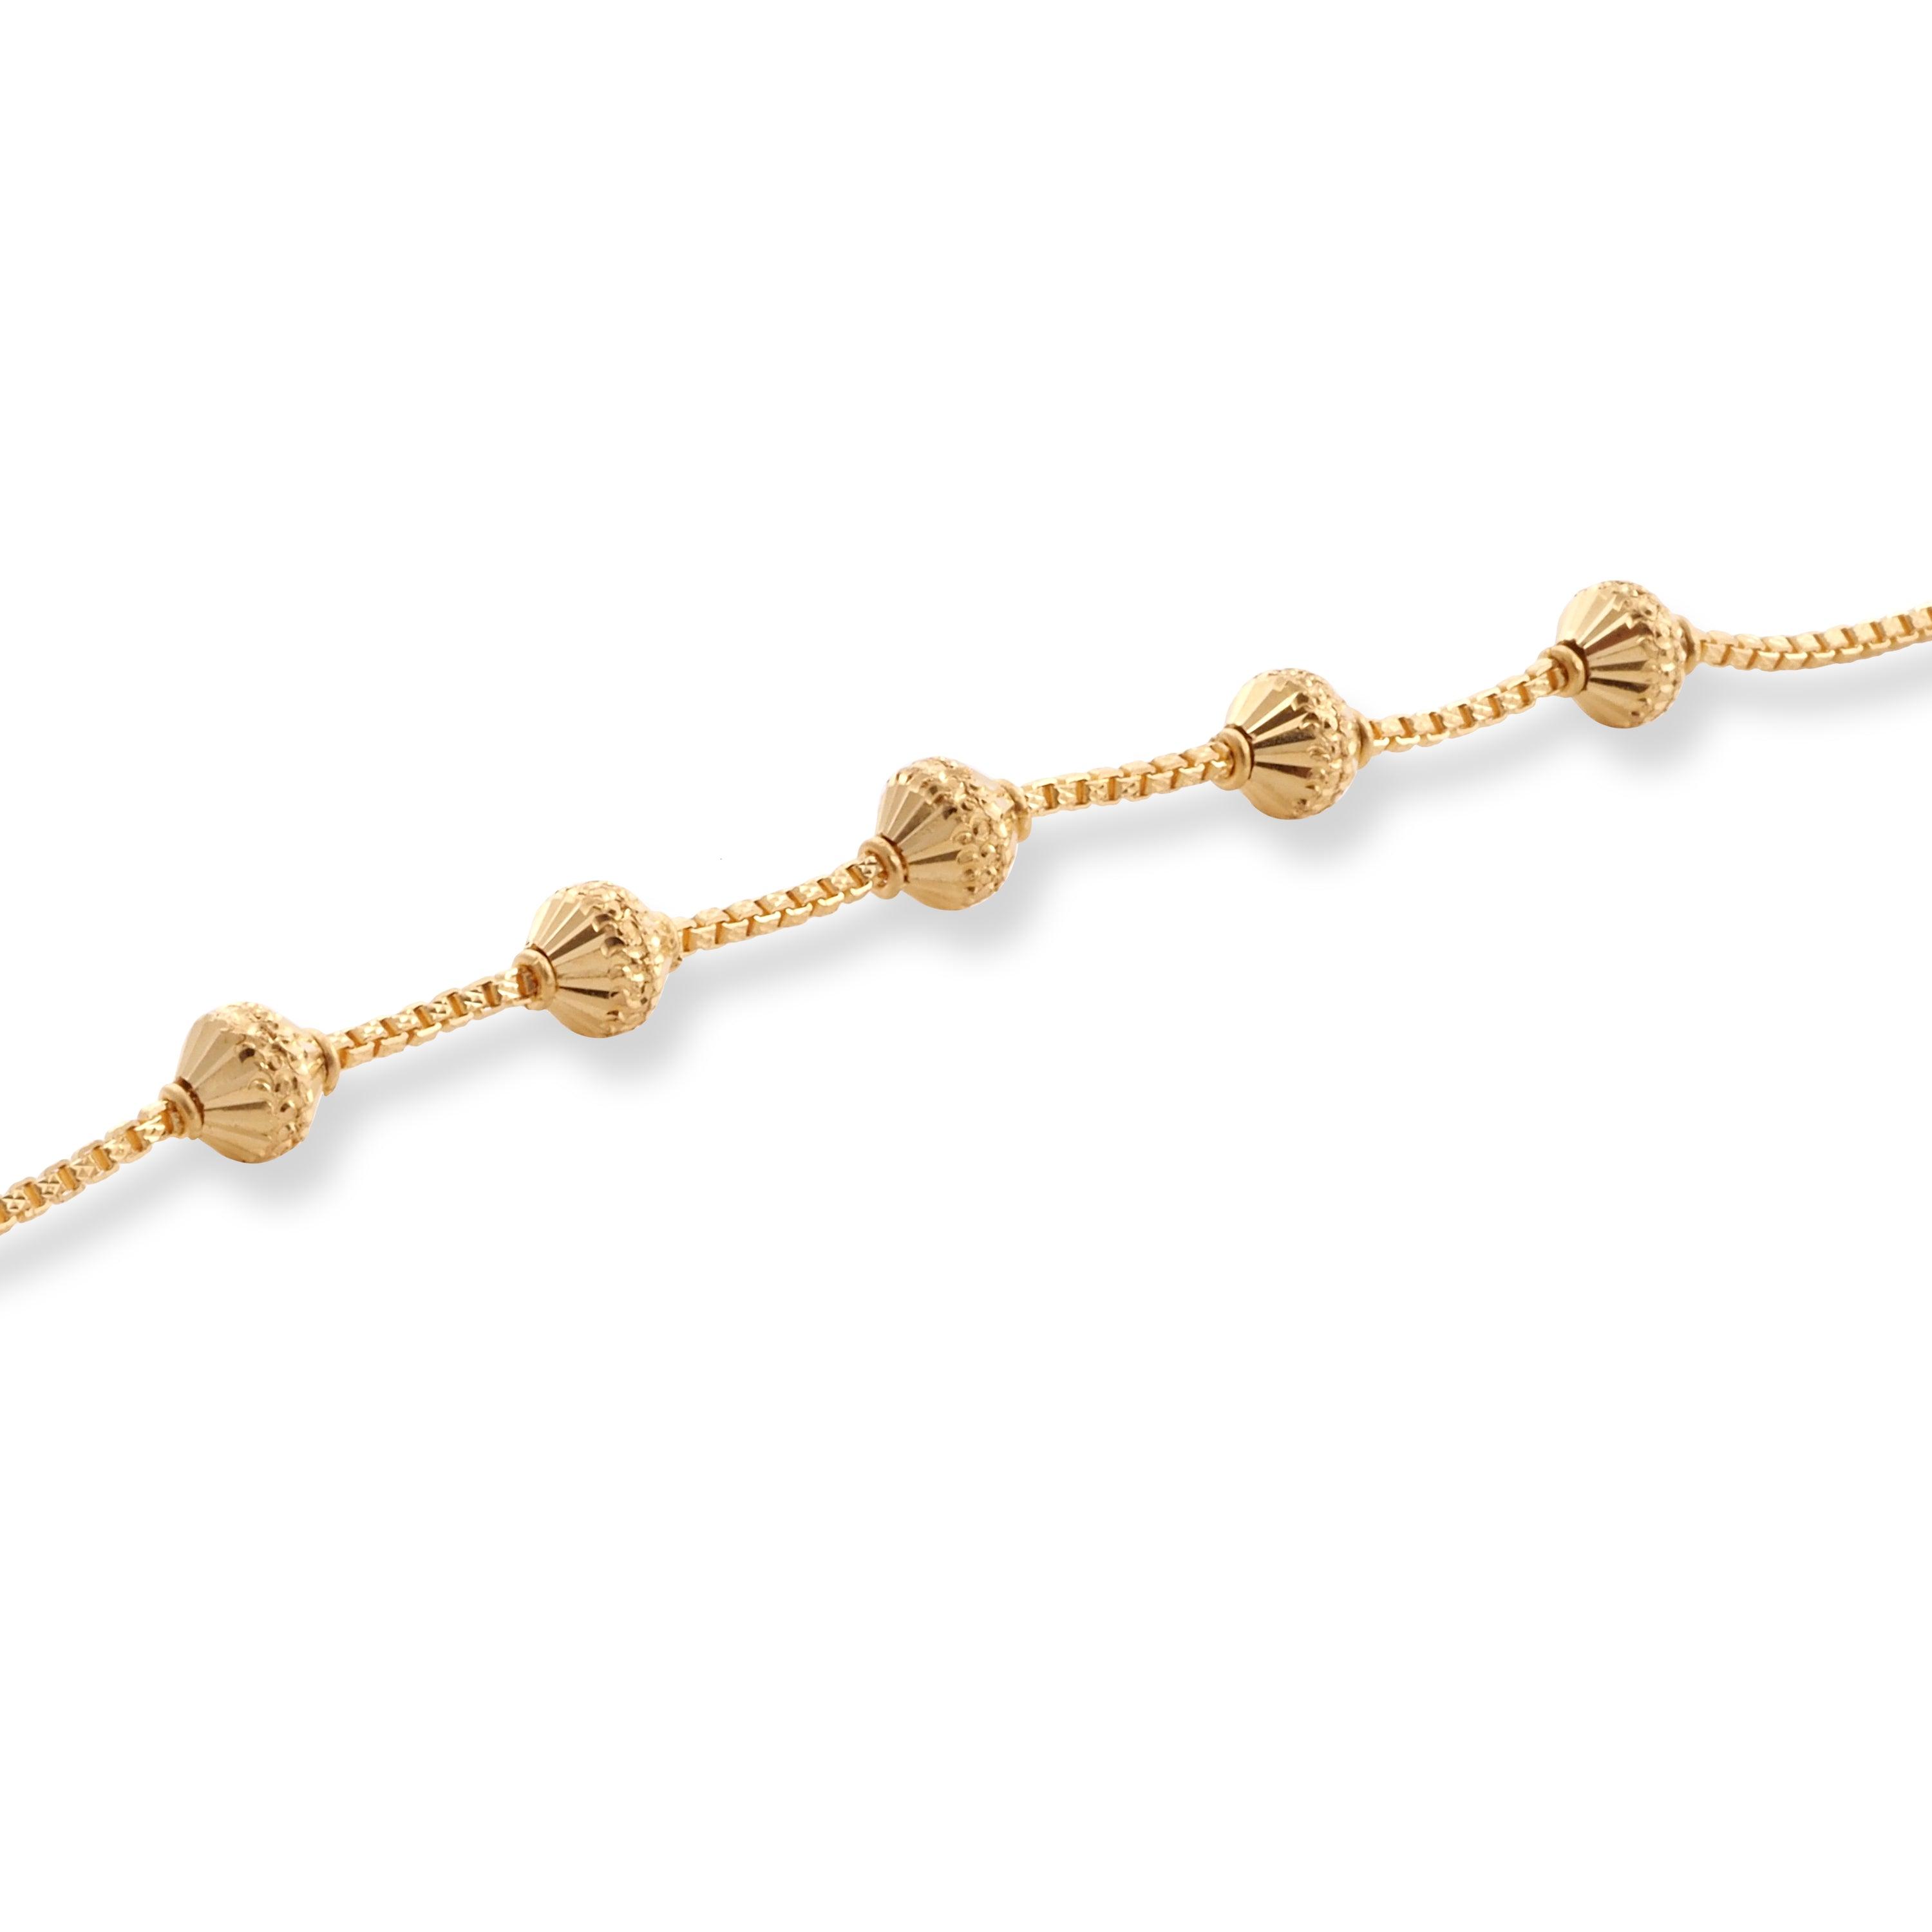 22ct Gold Bracelet with Diamond Cut Beads and Hook Clasp LBR-8511 - Minar Jewellers